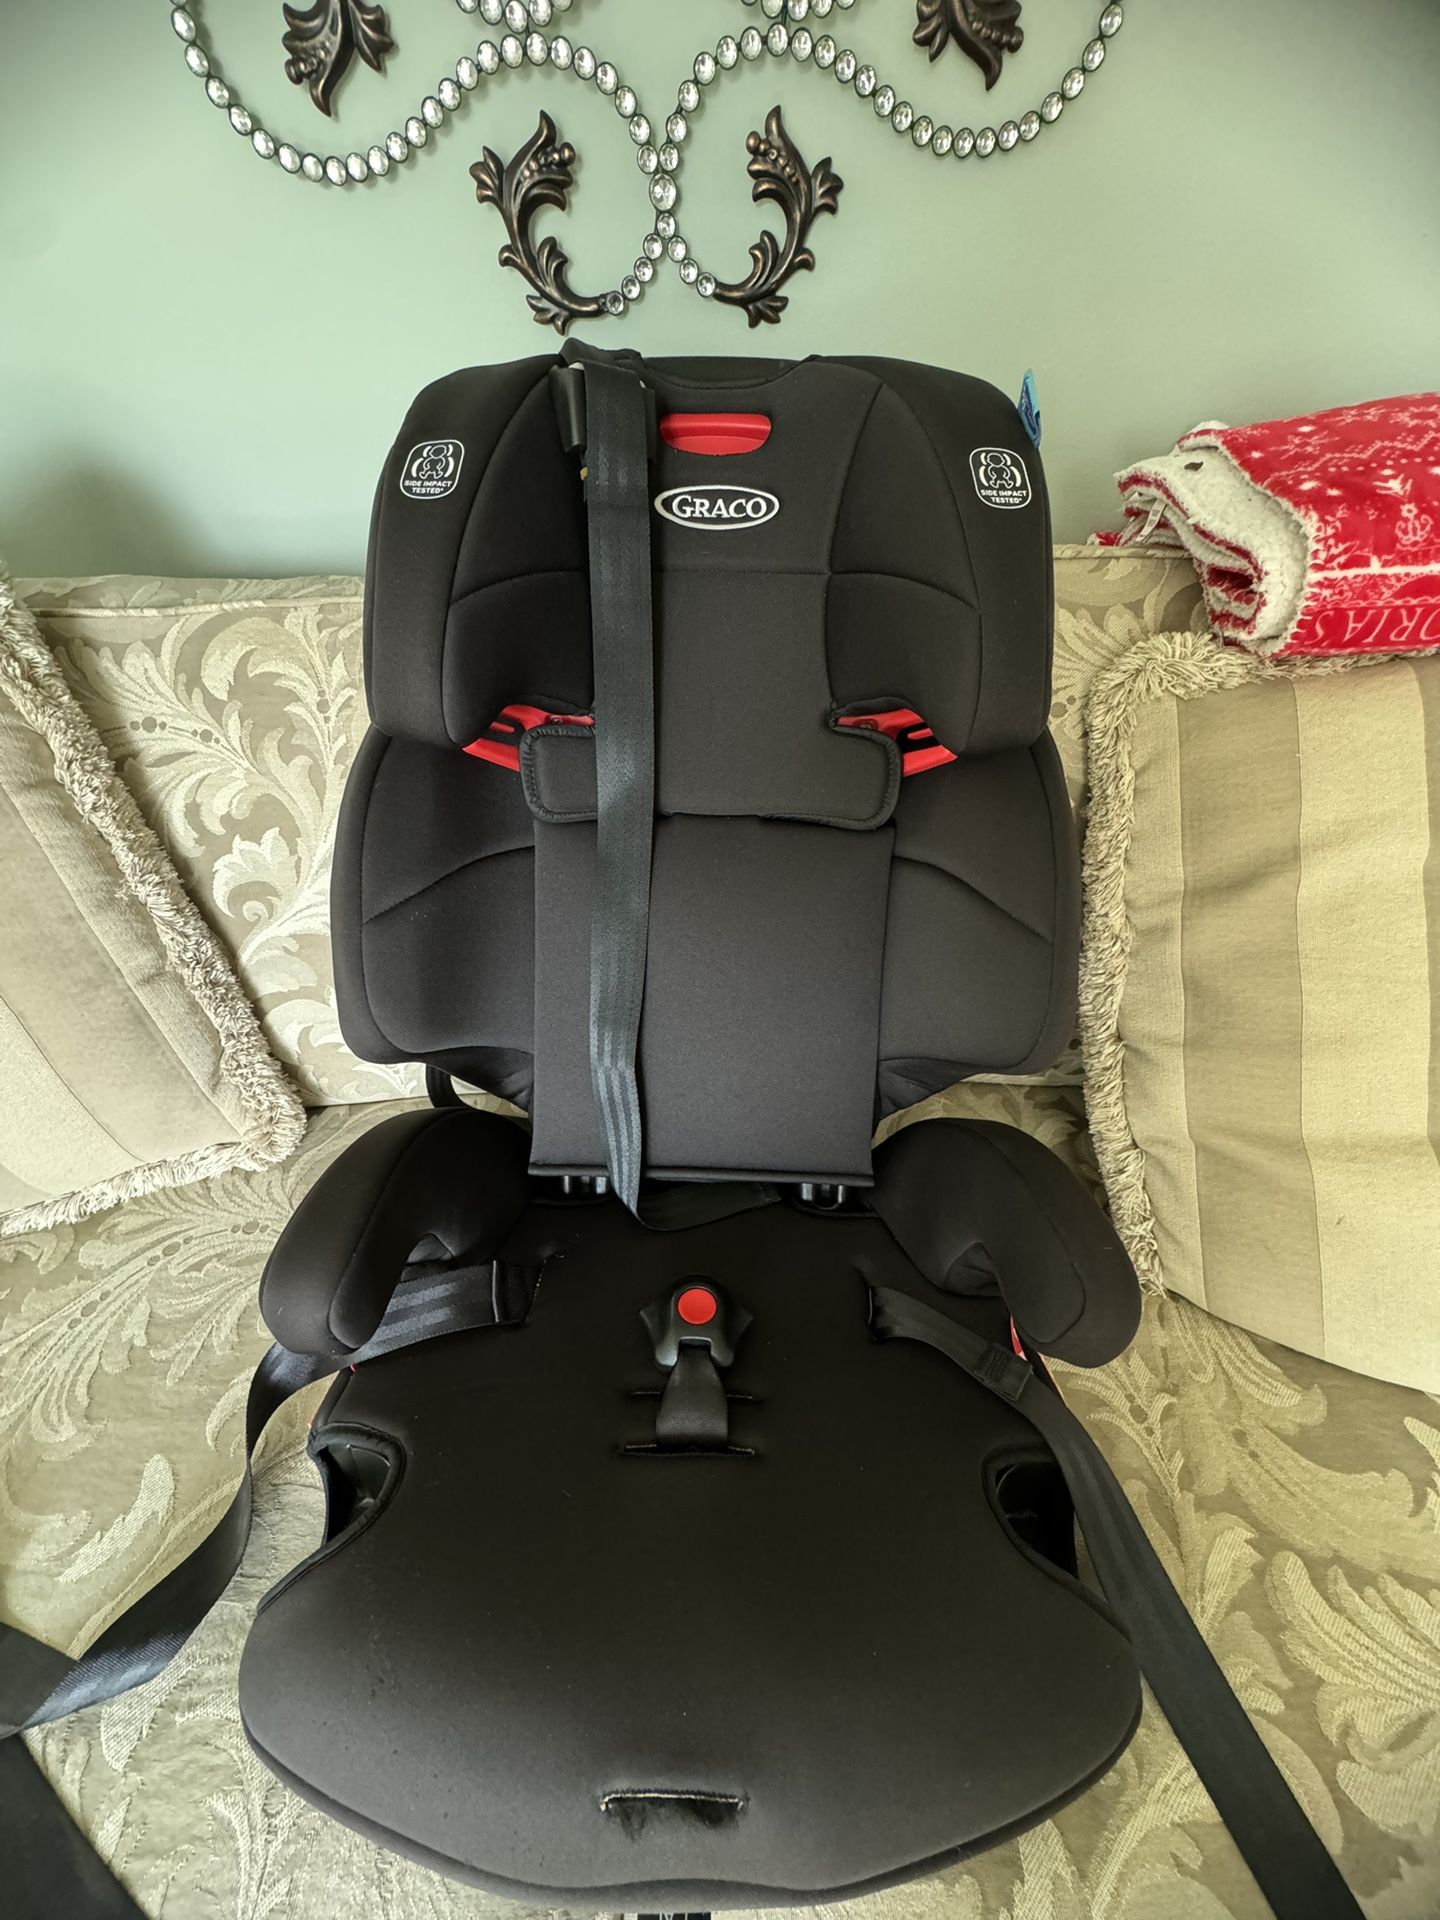 Graco Booster Car seat